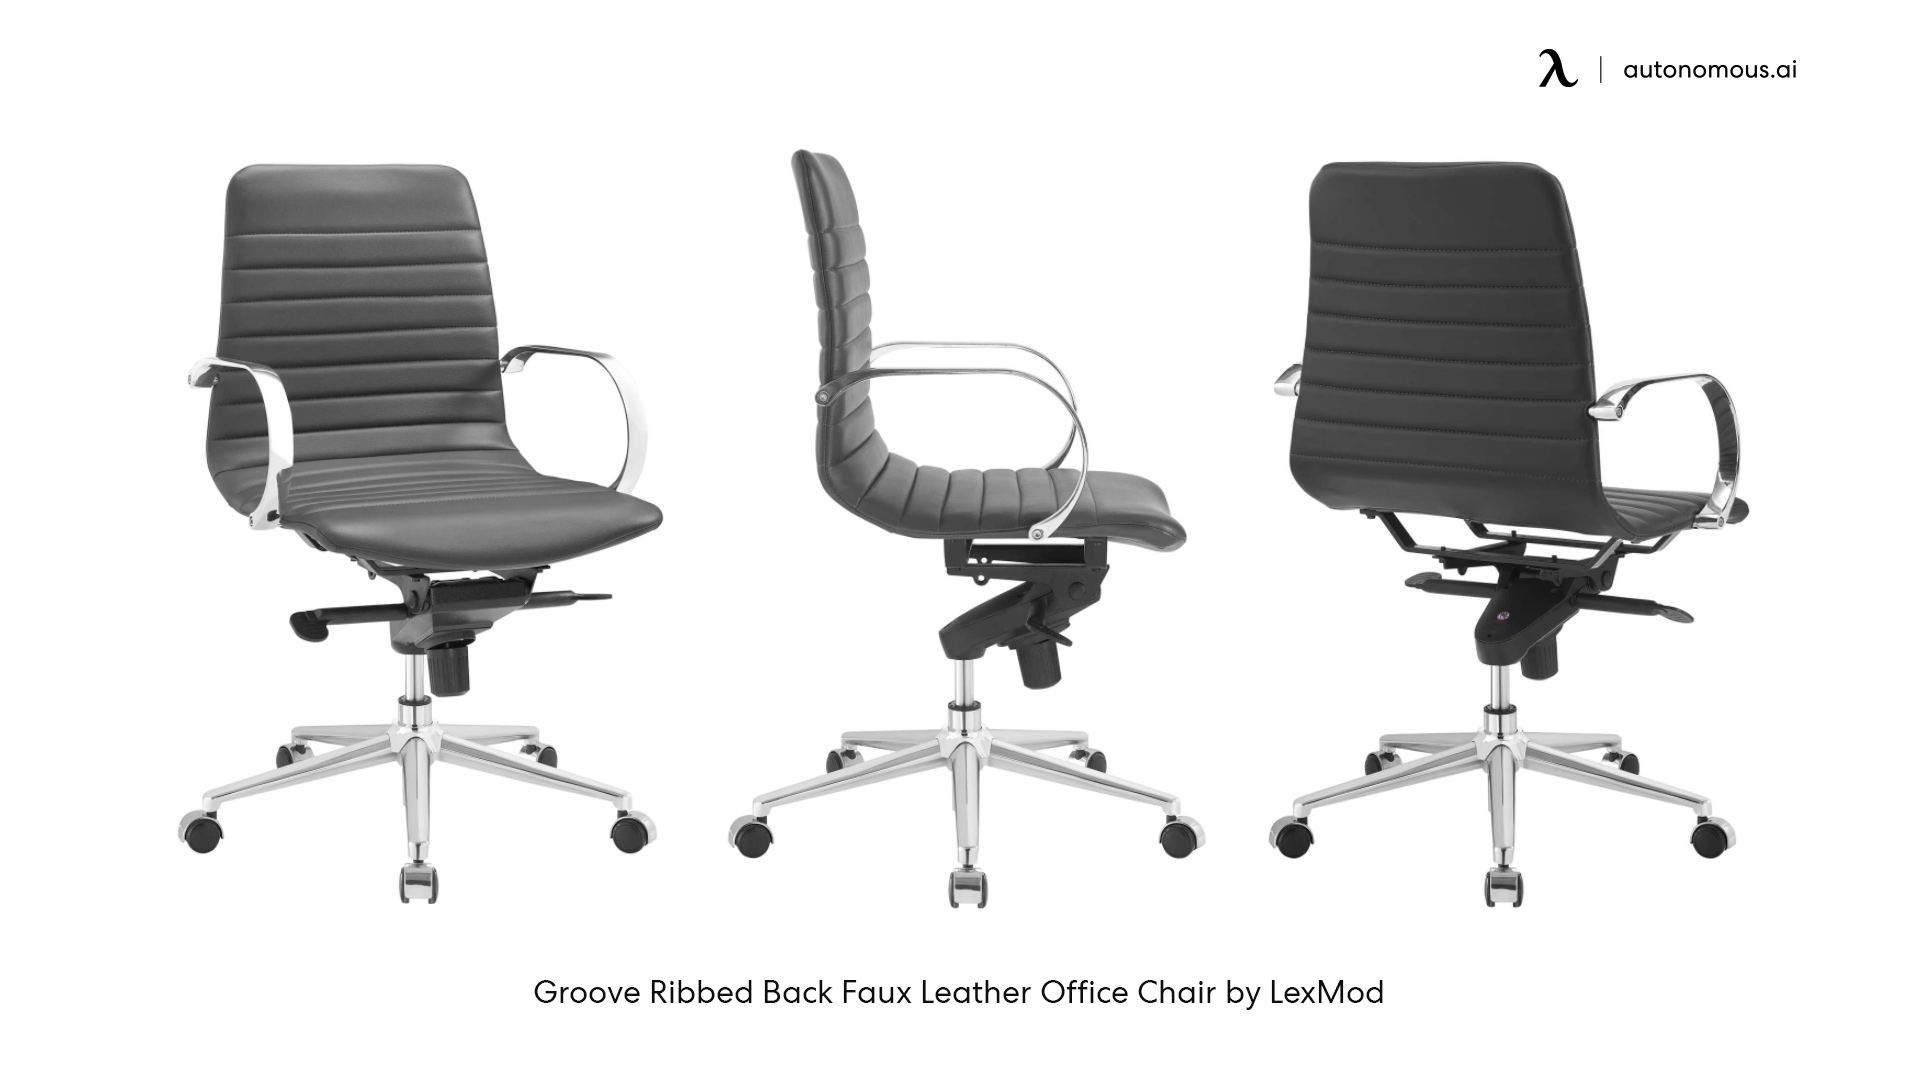 Groove Ribbed mid-century office chair